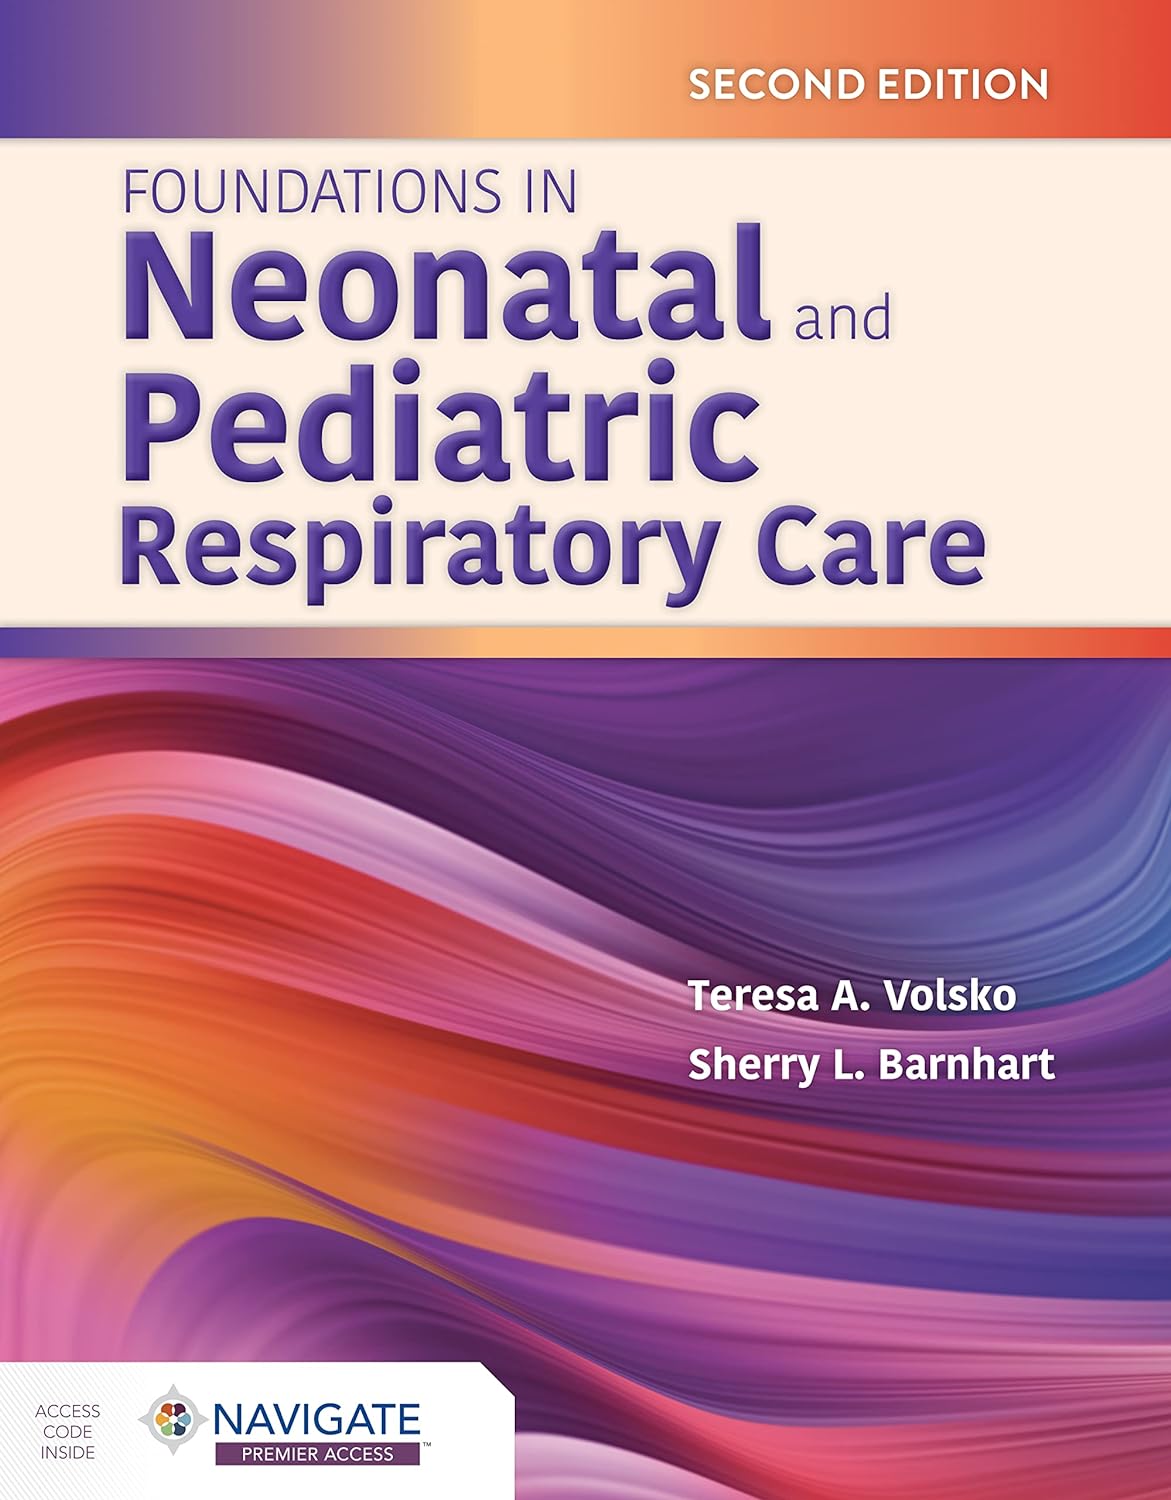 Foundations in Neonatal and Pediatric Respiratory Care, 2nd Edition  by Teresa A. Volsko